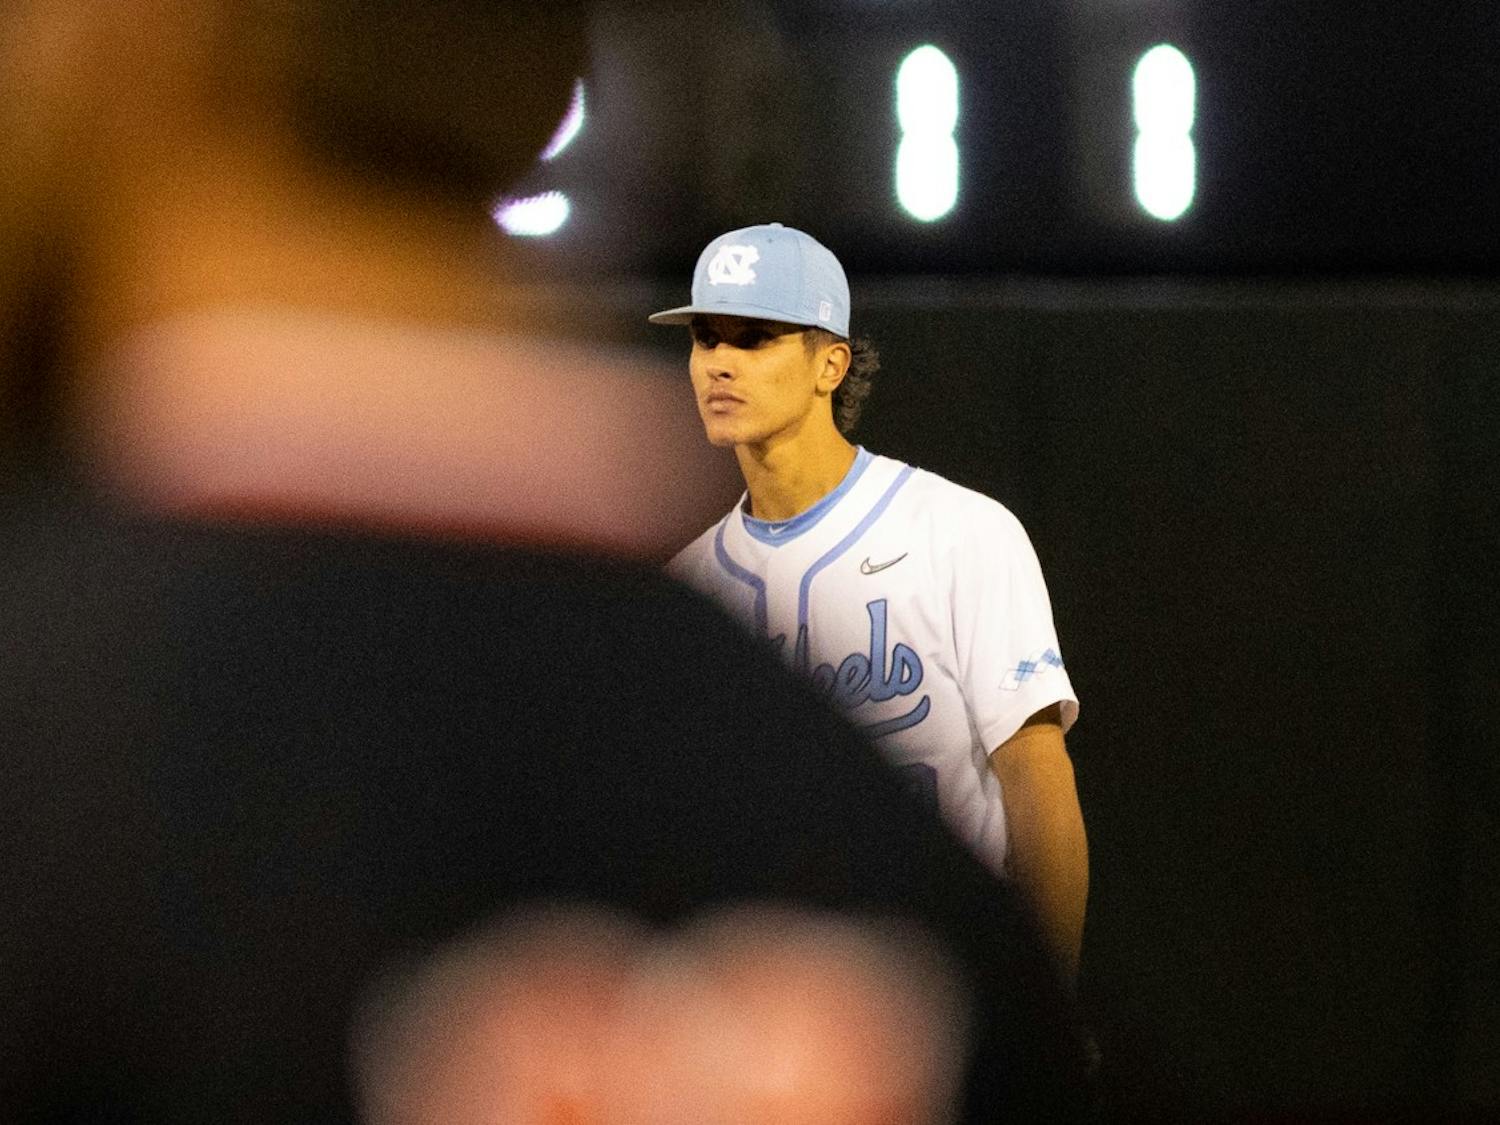 Sophomore second baseman Johnny Castagnozzi (19) sets up for the pitch during UNC's game against Campbell at Boshamer Stadium on Tuesday, April 19, 2022.